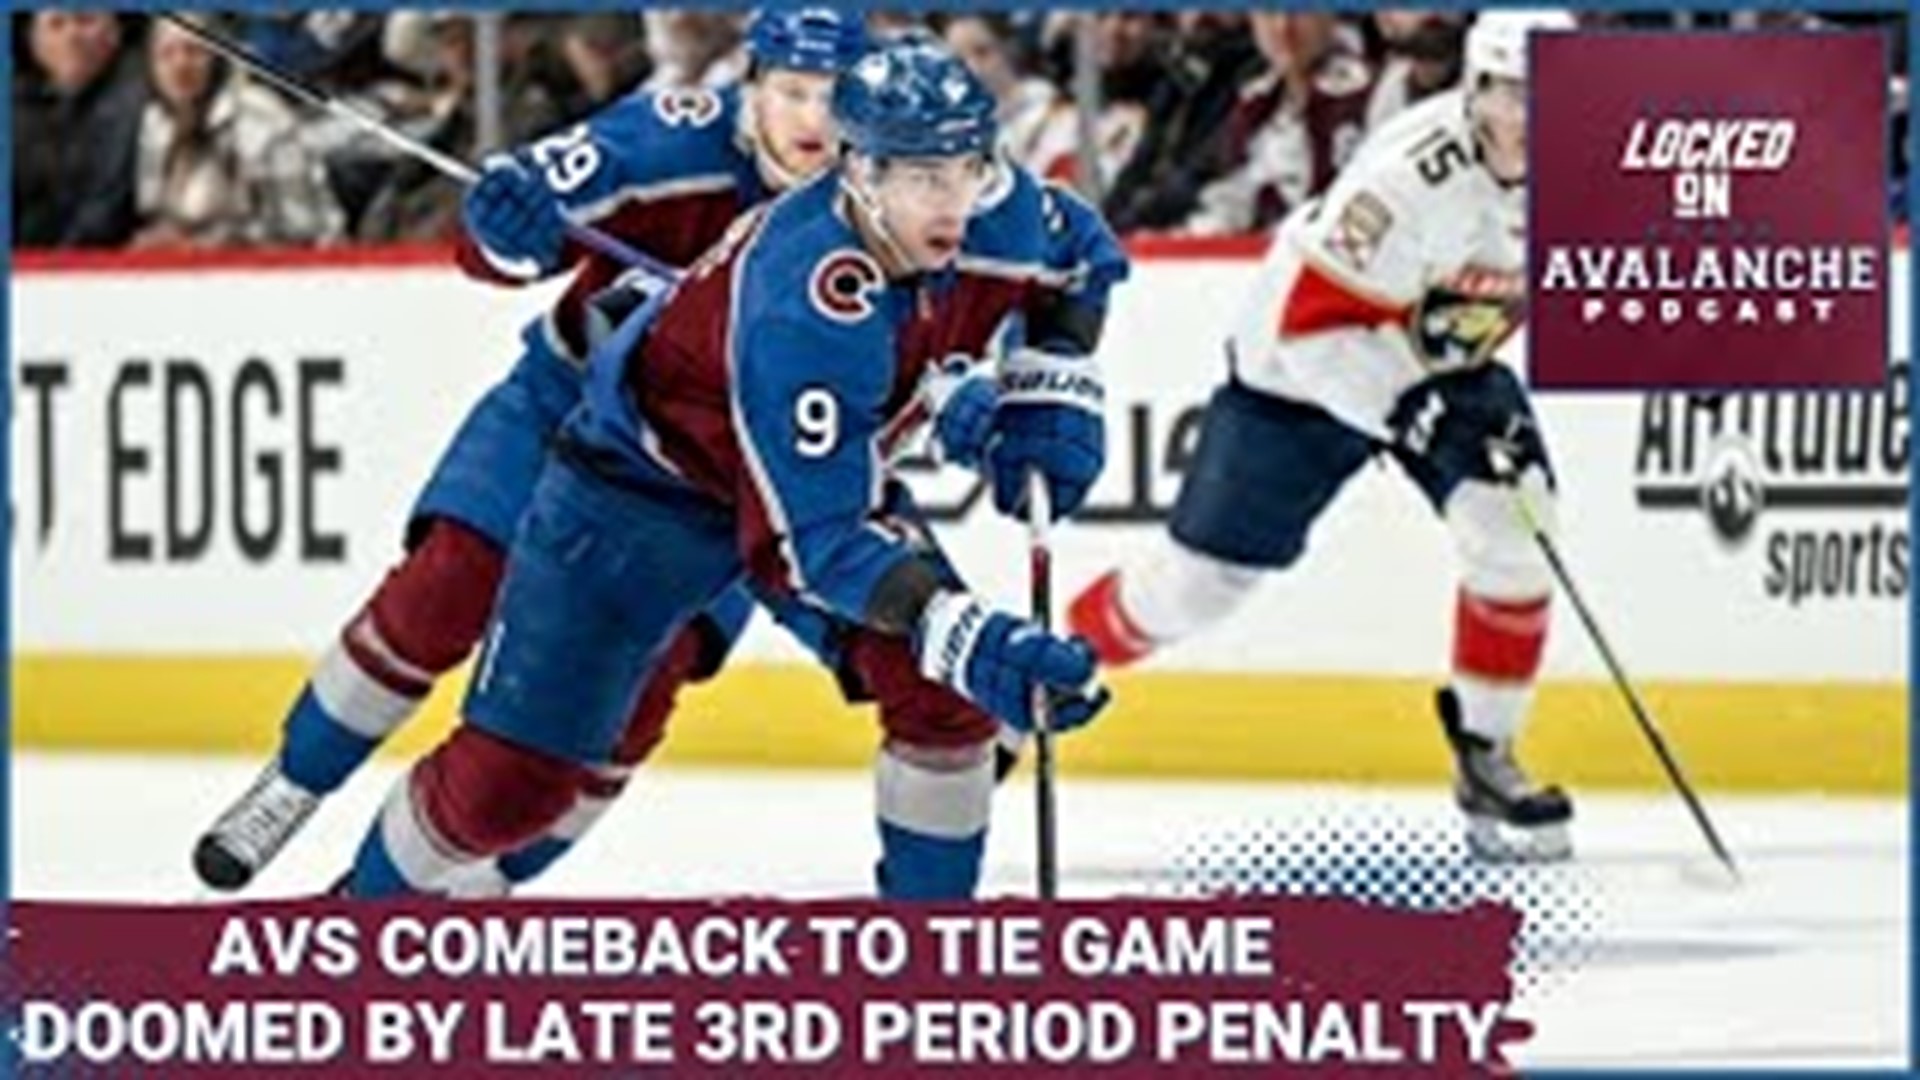 The Avs got into trouble quickly against the Panthers but managed to claw their way back from a 4-1 hole in the third period.